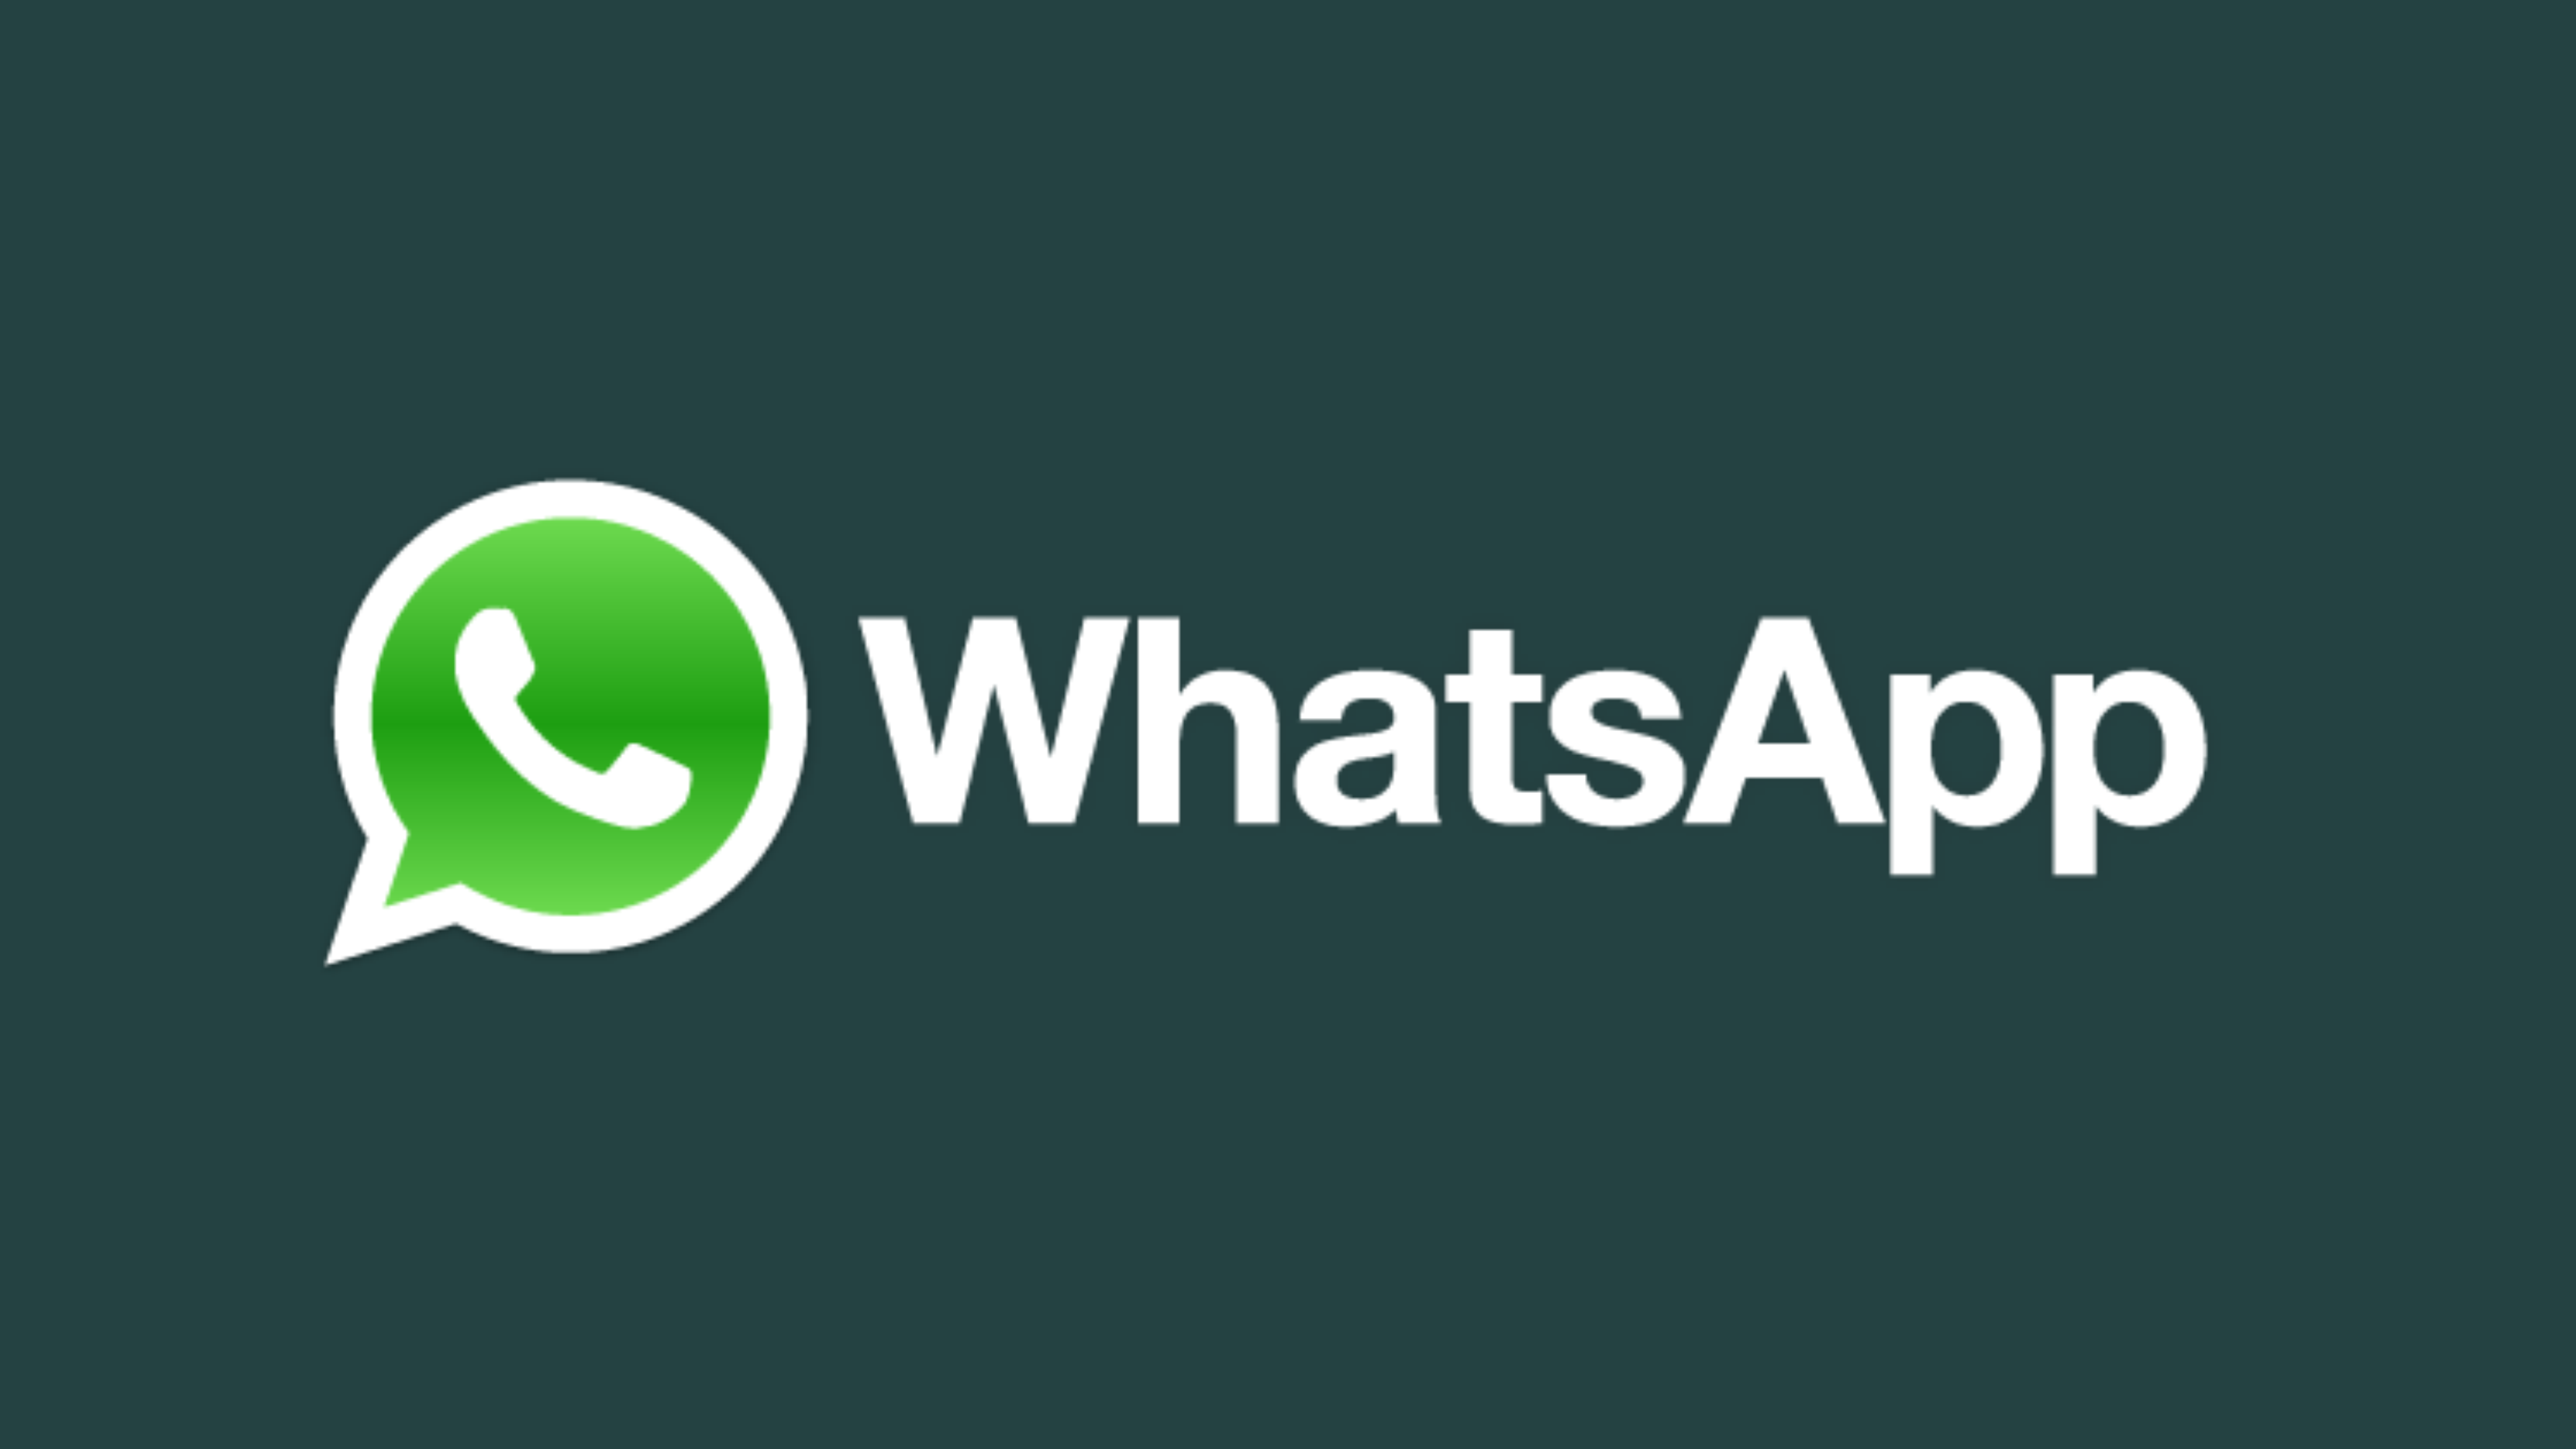 whatsapp-s-new-privacy-features-allows-to-hide-last-seen-status